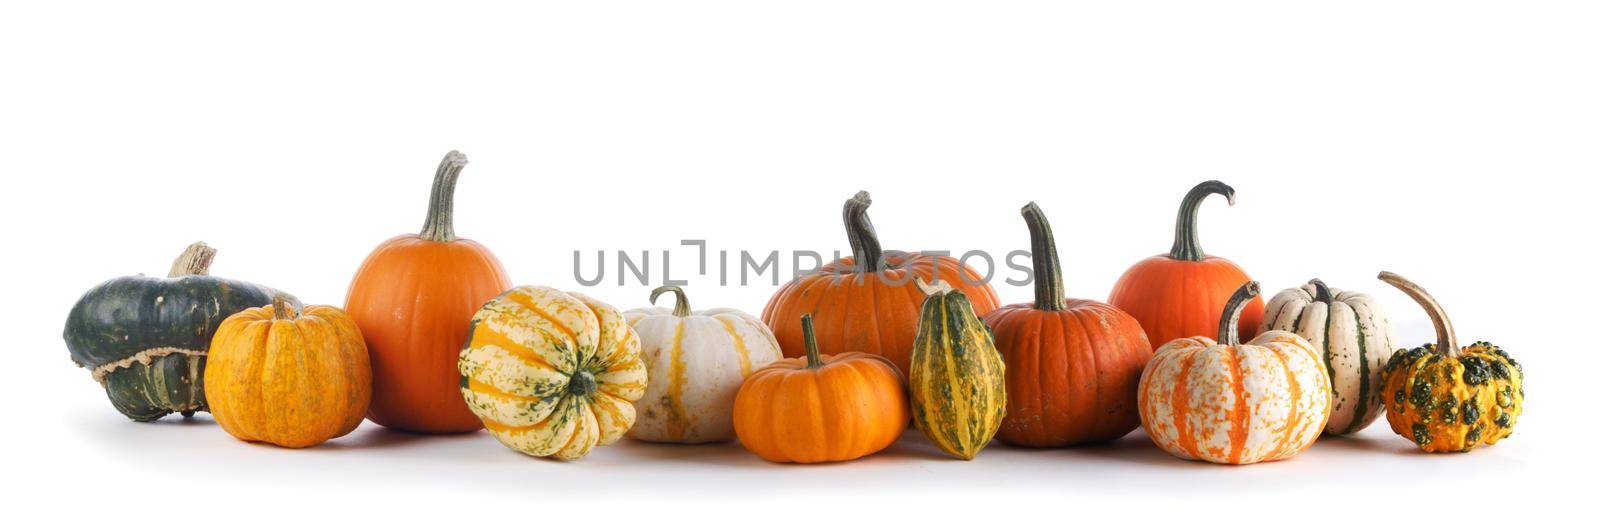 Many various pumpkins in a row isolated on white background, Halloween or Thanksgiving day concept